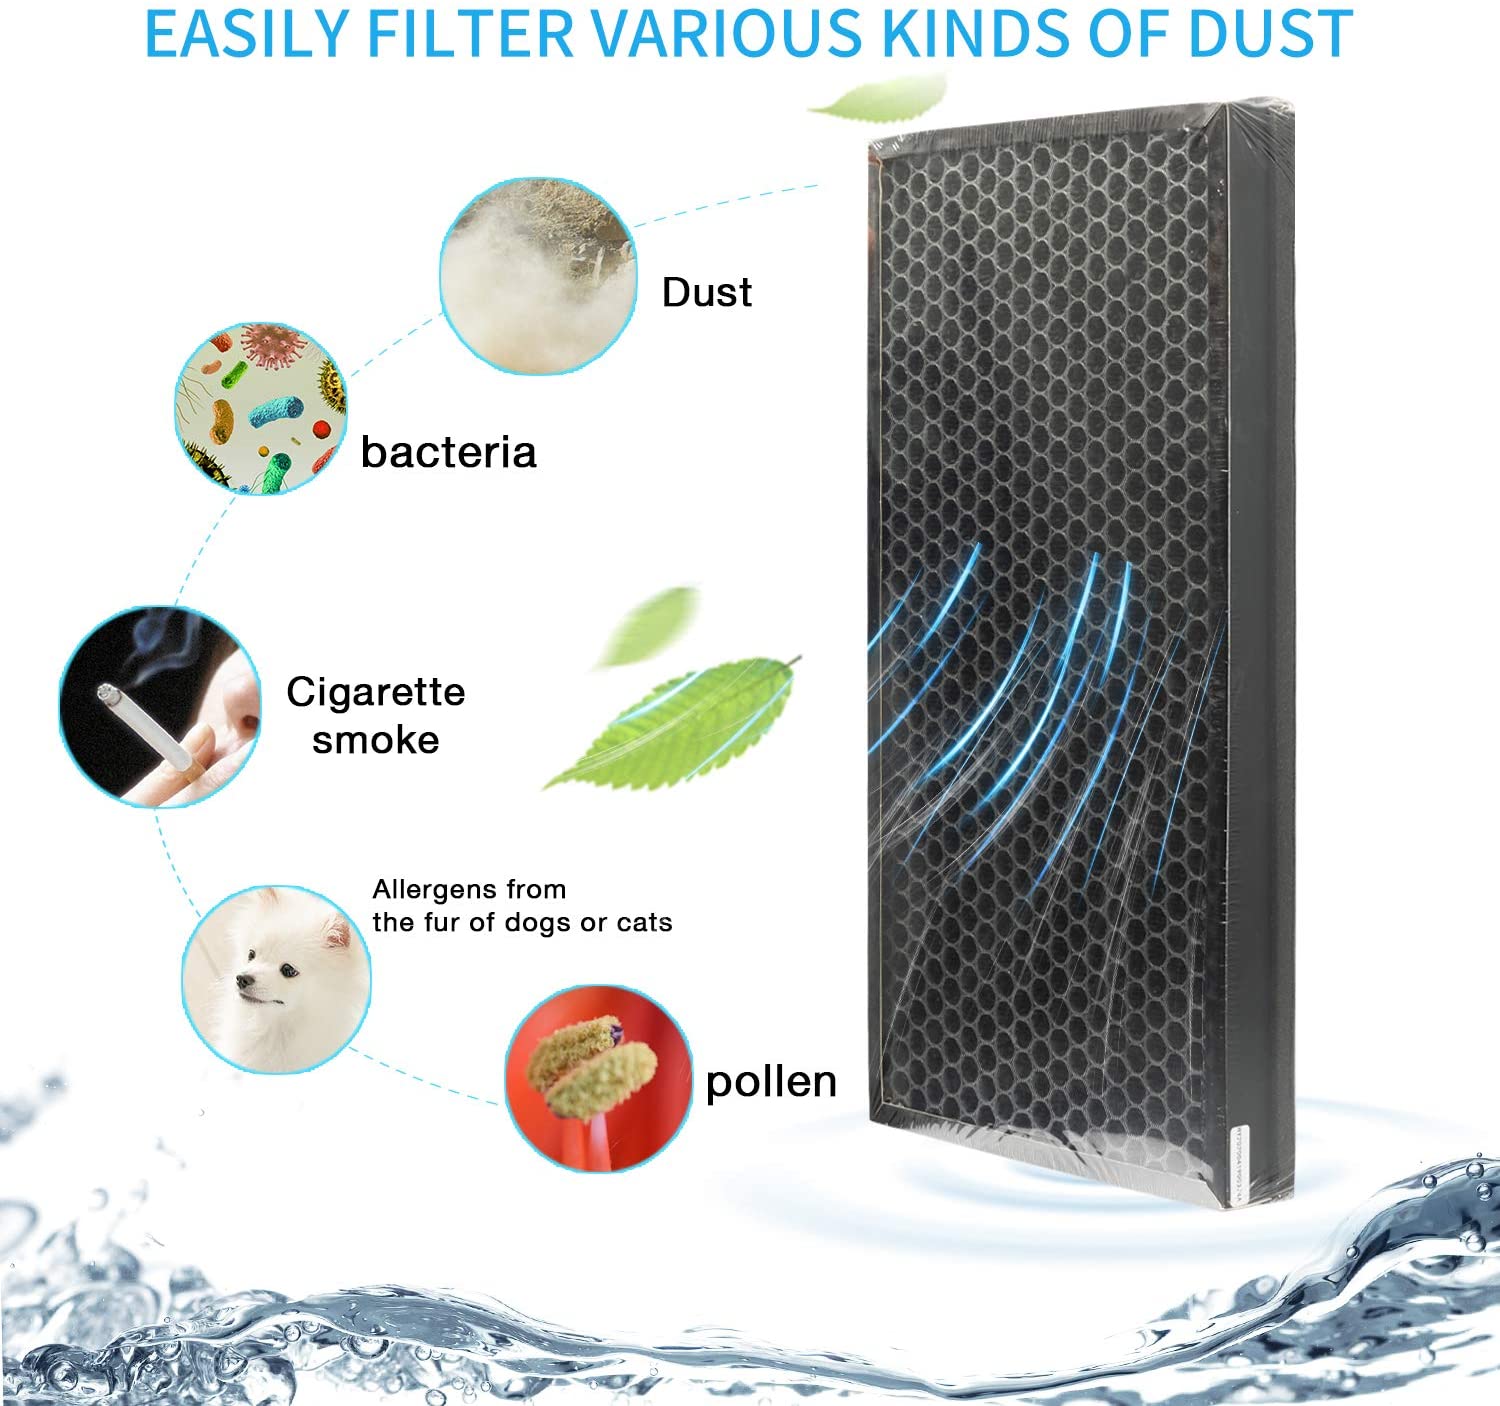 ROVACS Air Purifier RV550 Filter (2 pcs), High efficiency H13 particulate air filter and activated carbon sponge, lasts over 3000 hours, captures more than 99.97% of particles with a diameter greater than or equal to 0.3 microns